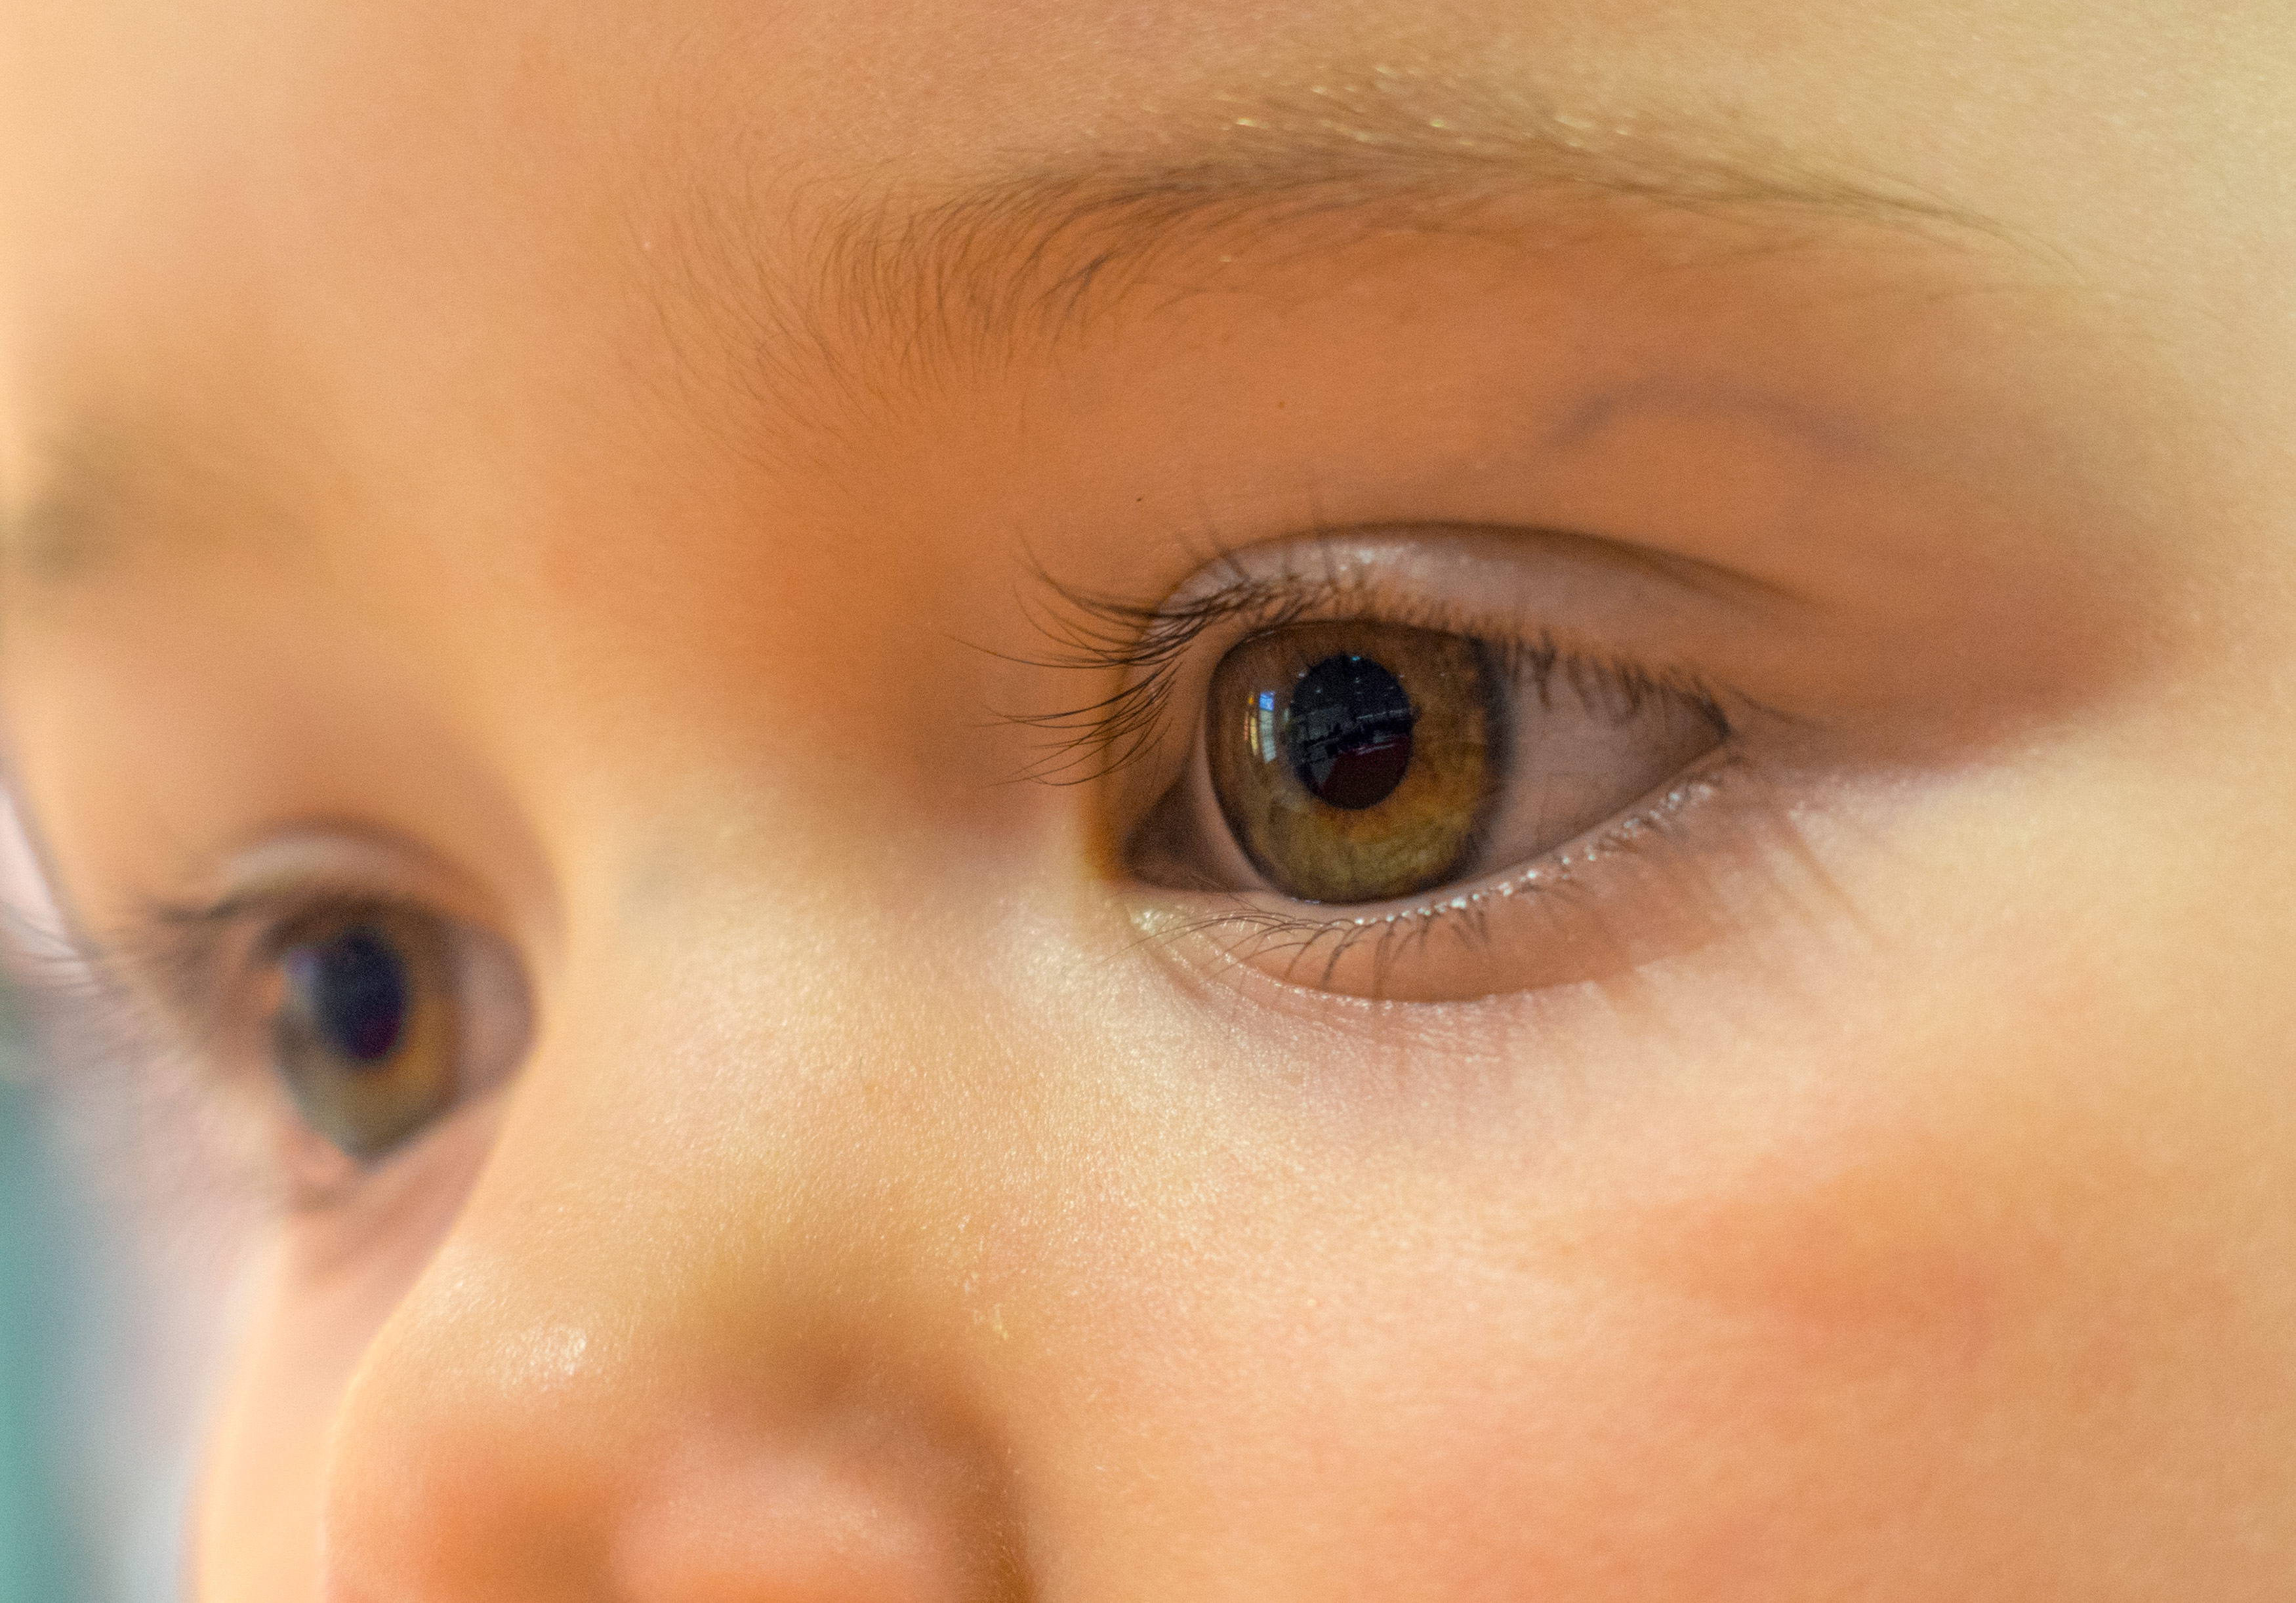 When Are Baby Eyes Fully Developed?